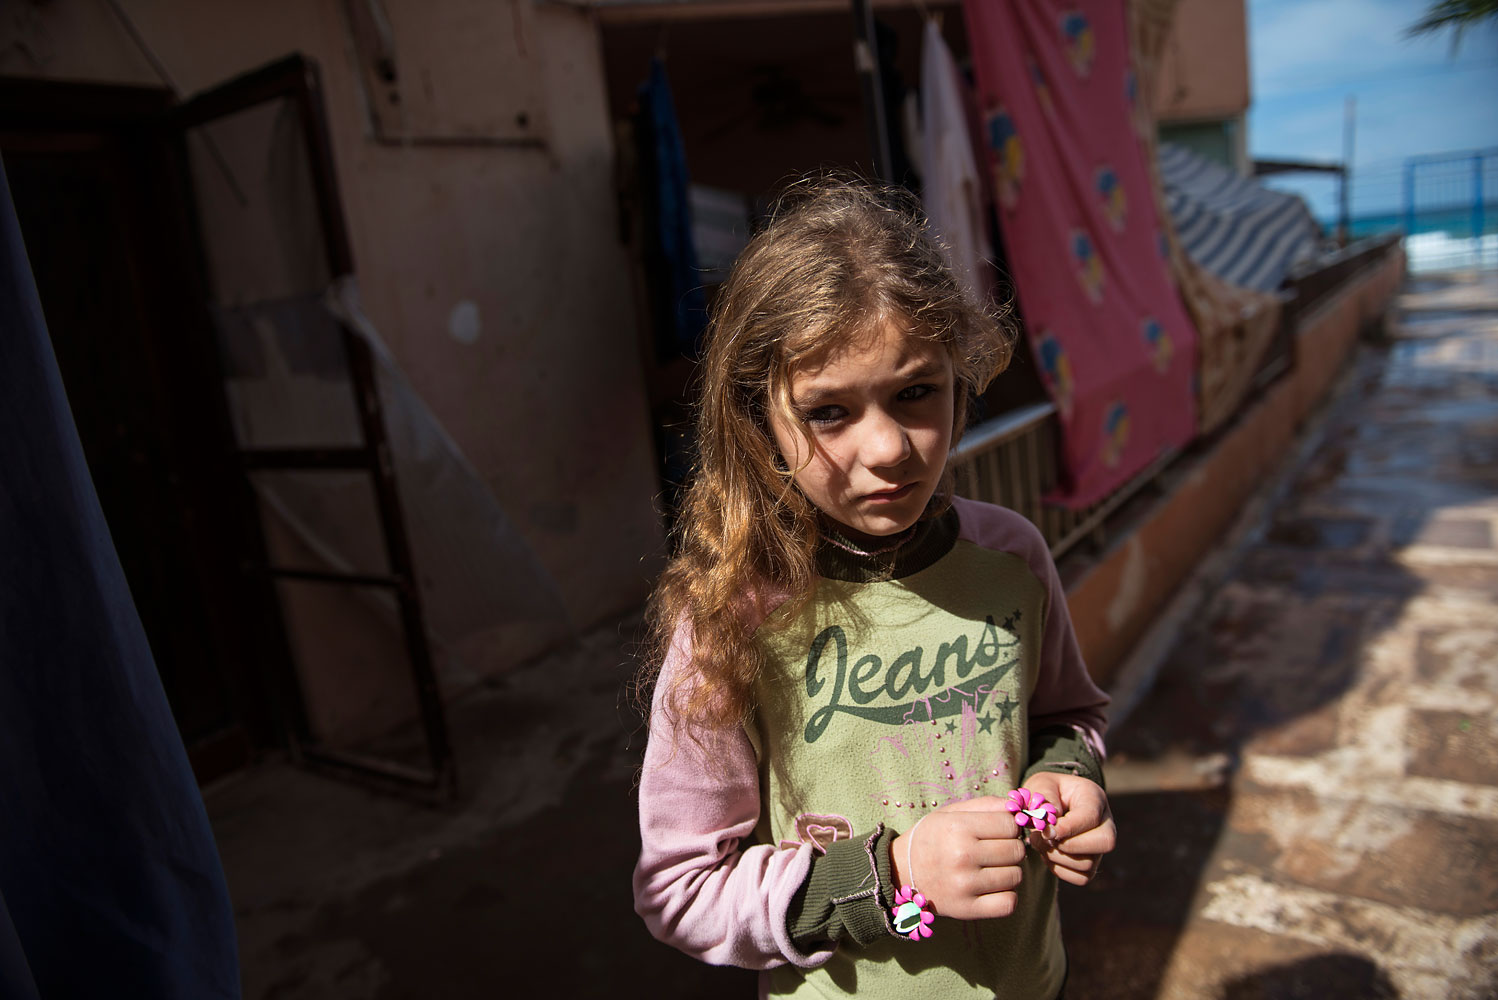 Syrian refugee Ranya, 10, from the Idlib countryside, stands outside her family's room in the Nour resort, a collective shelter that houses roughly 500 Syrian refugees in Tripoli, in Herri, in North Lebanon, March 10, 2014. Ranya and her family fled Idlib about one year ago after the bombing intensified; she has been out of school for three years.